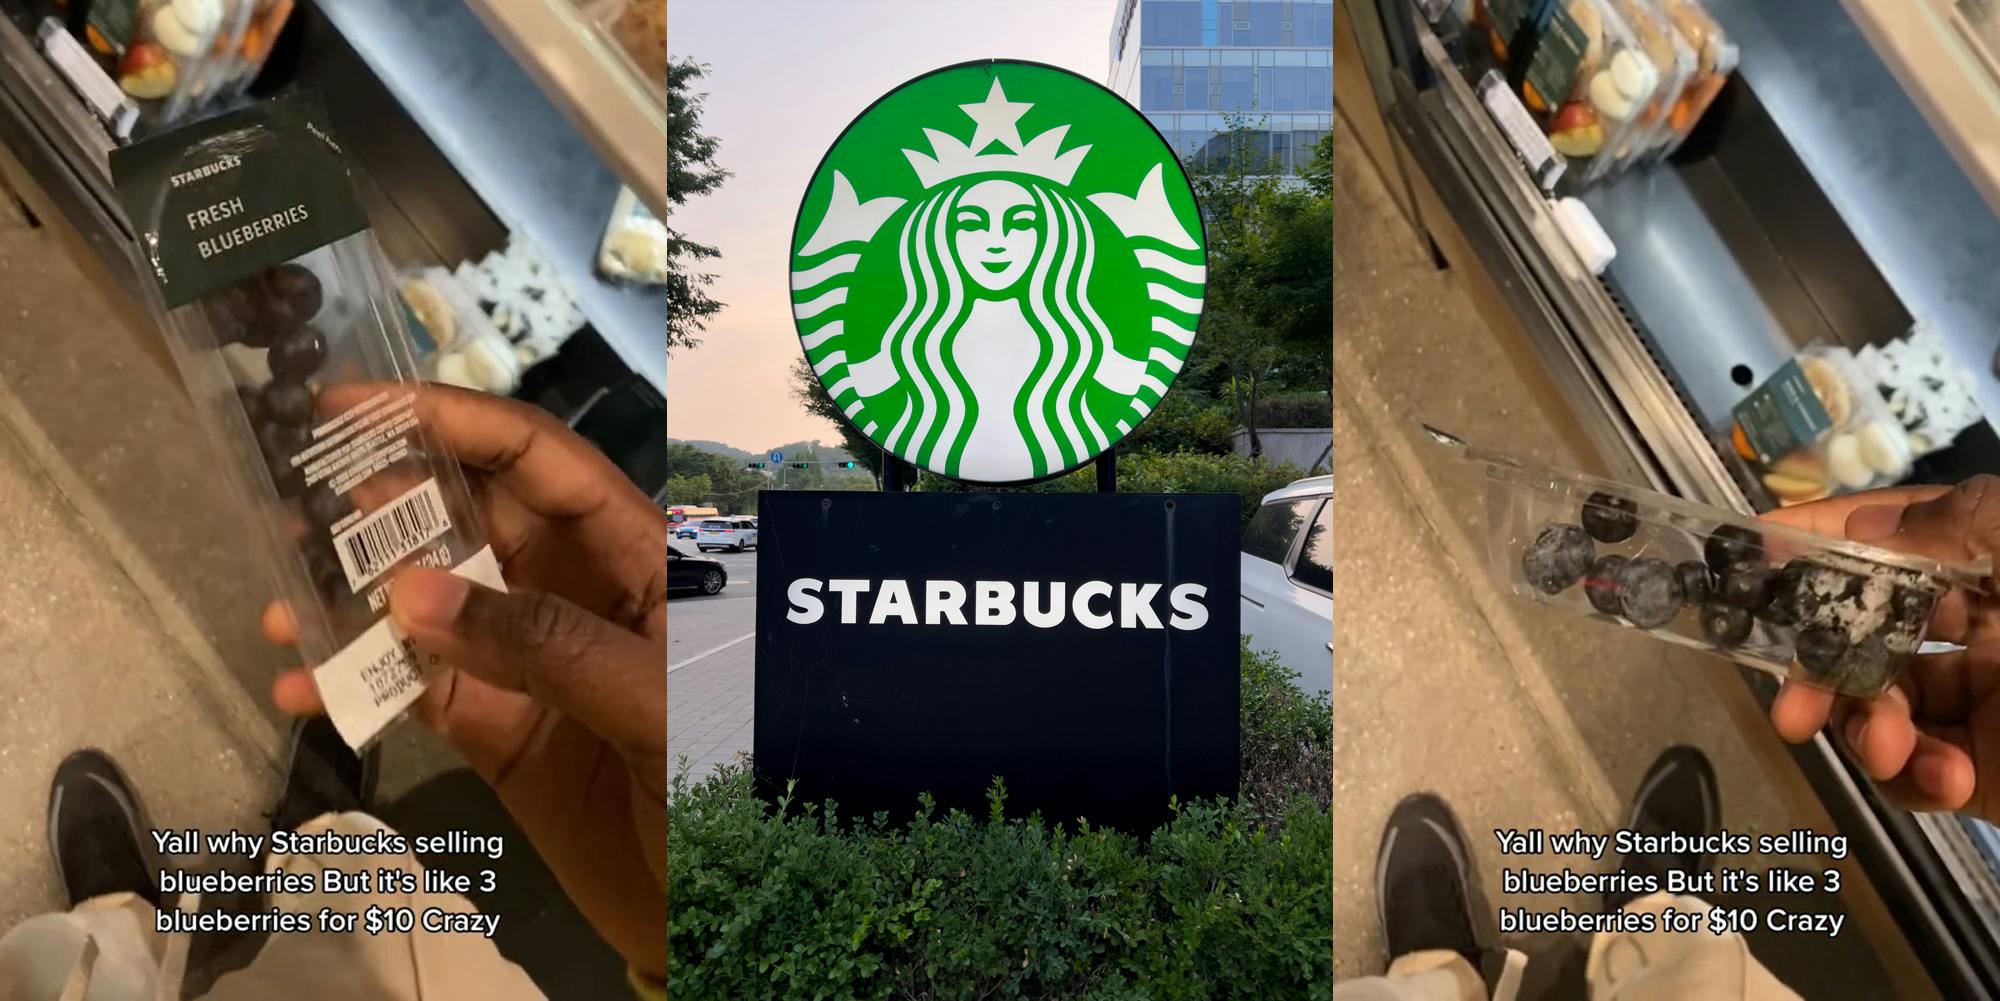 person holding small container of blueberries with caption "Yall why Starbucks selling blueberries But it's like 3 blueberries for $10 Crazy" (l) Starbucks sign outside (c) person holding small container of blueberries with caption "Yall why Starbucks selling blueberries But it's like 3 blueberries for $10 Crazy" (r)